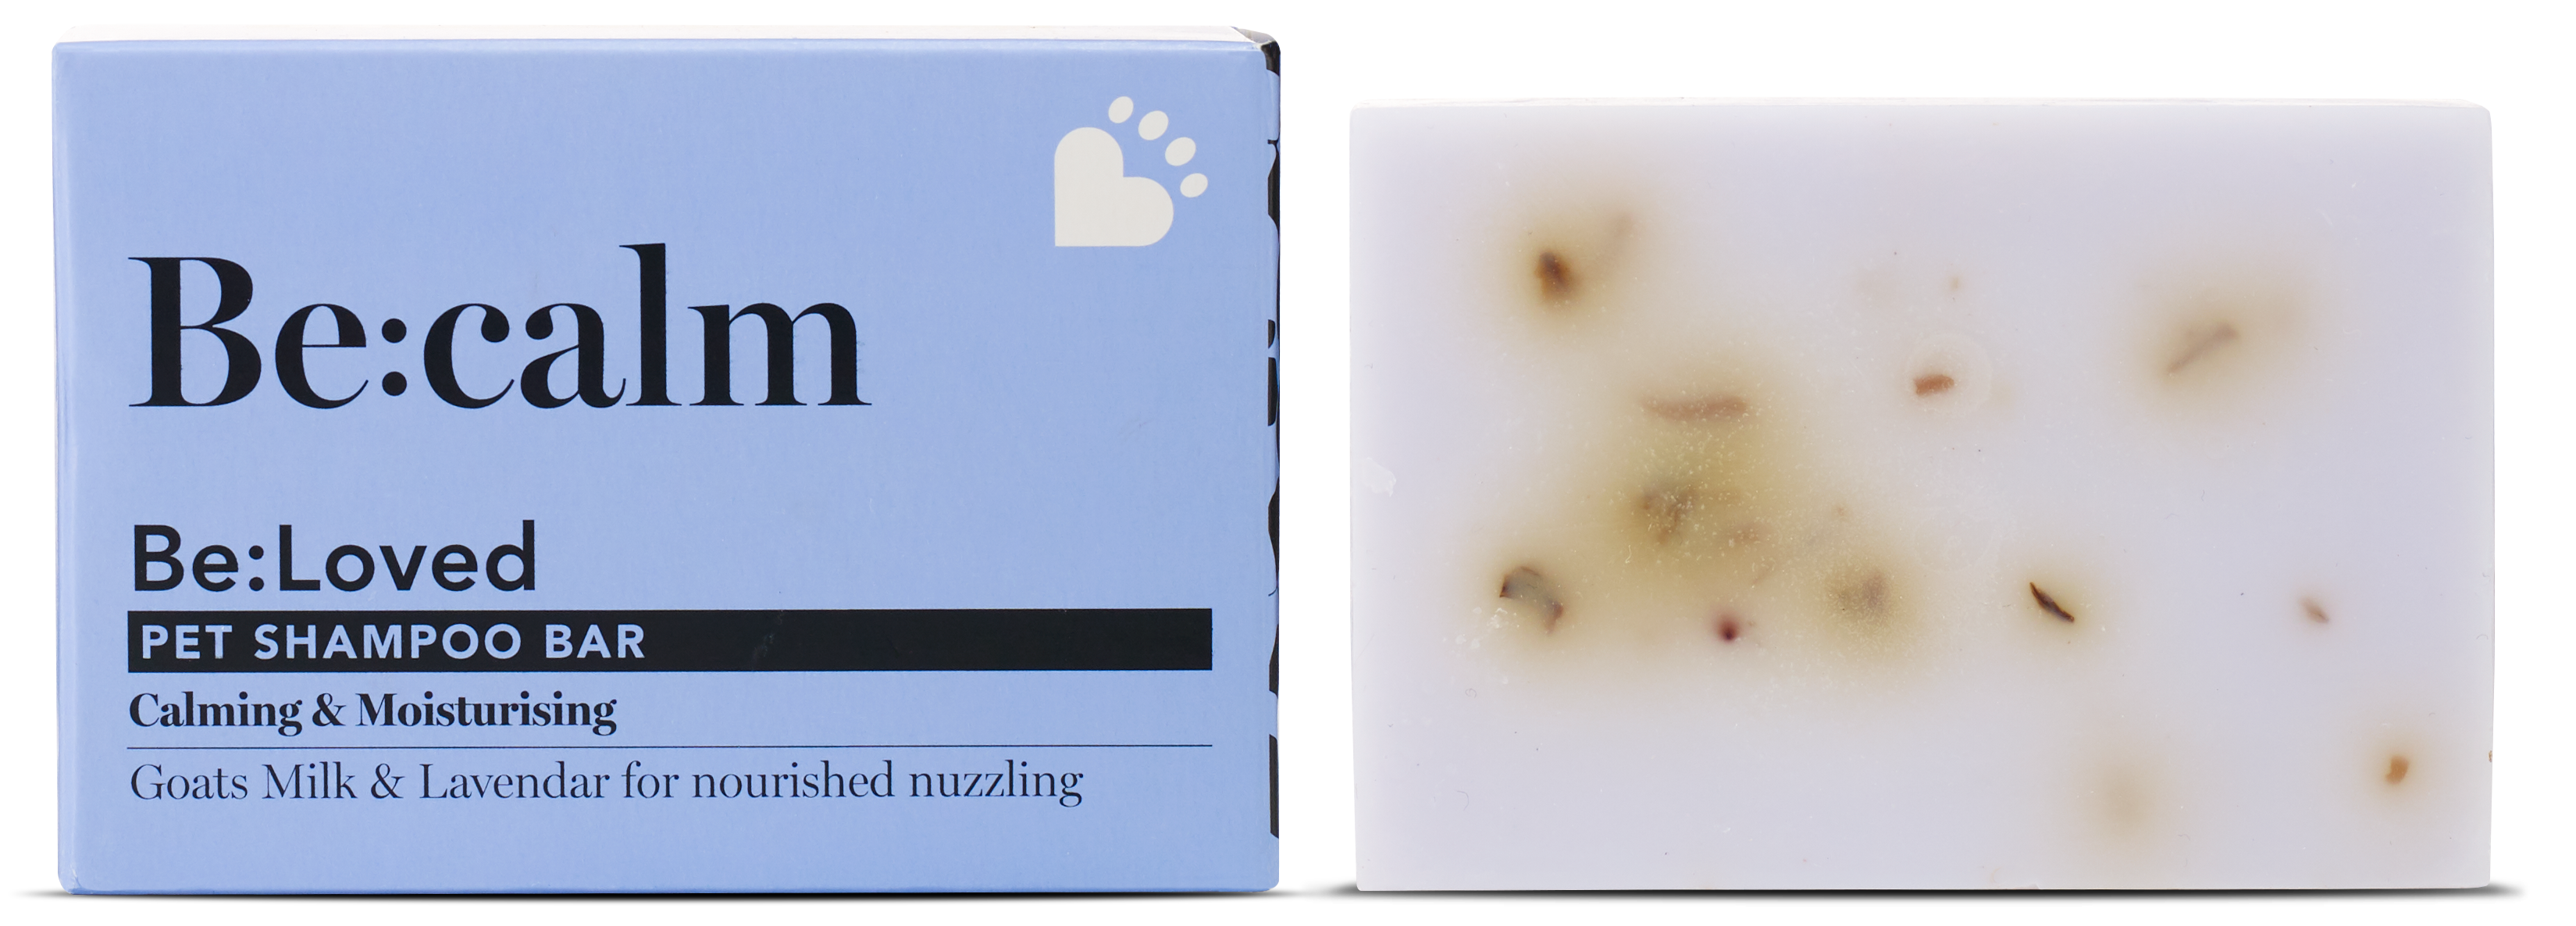 Be:calm pet shampoo bar packaging and product